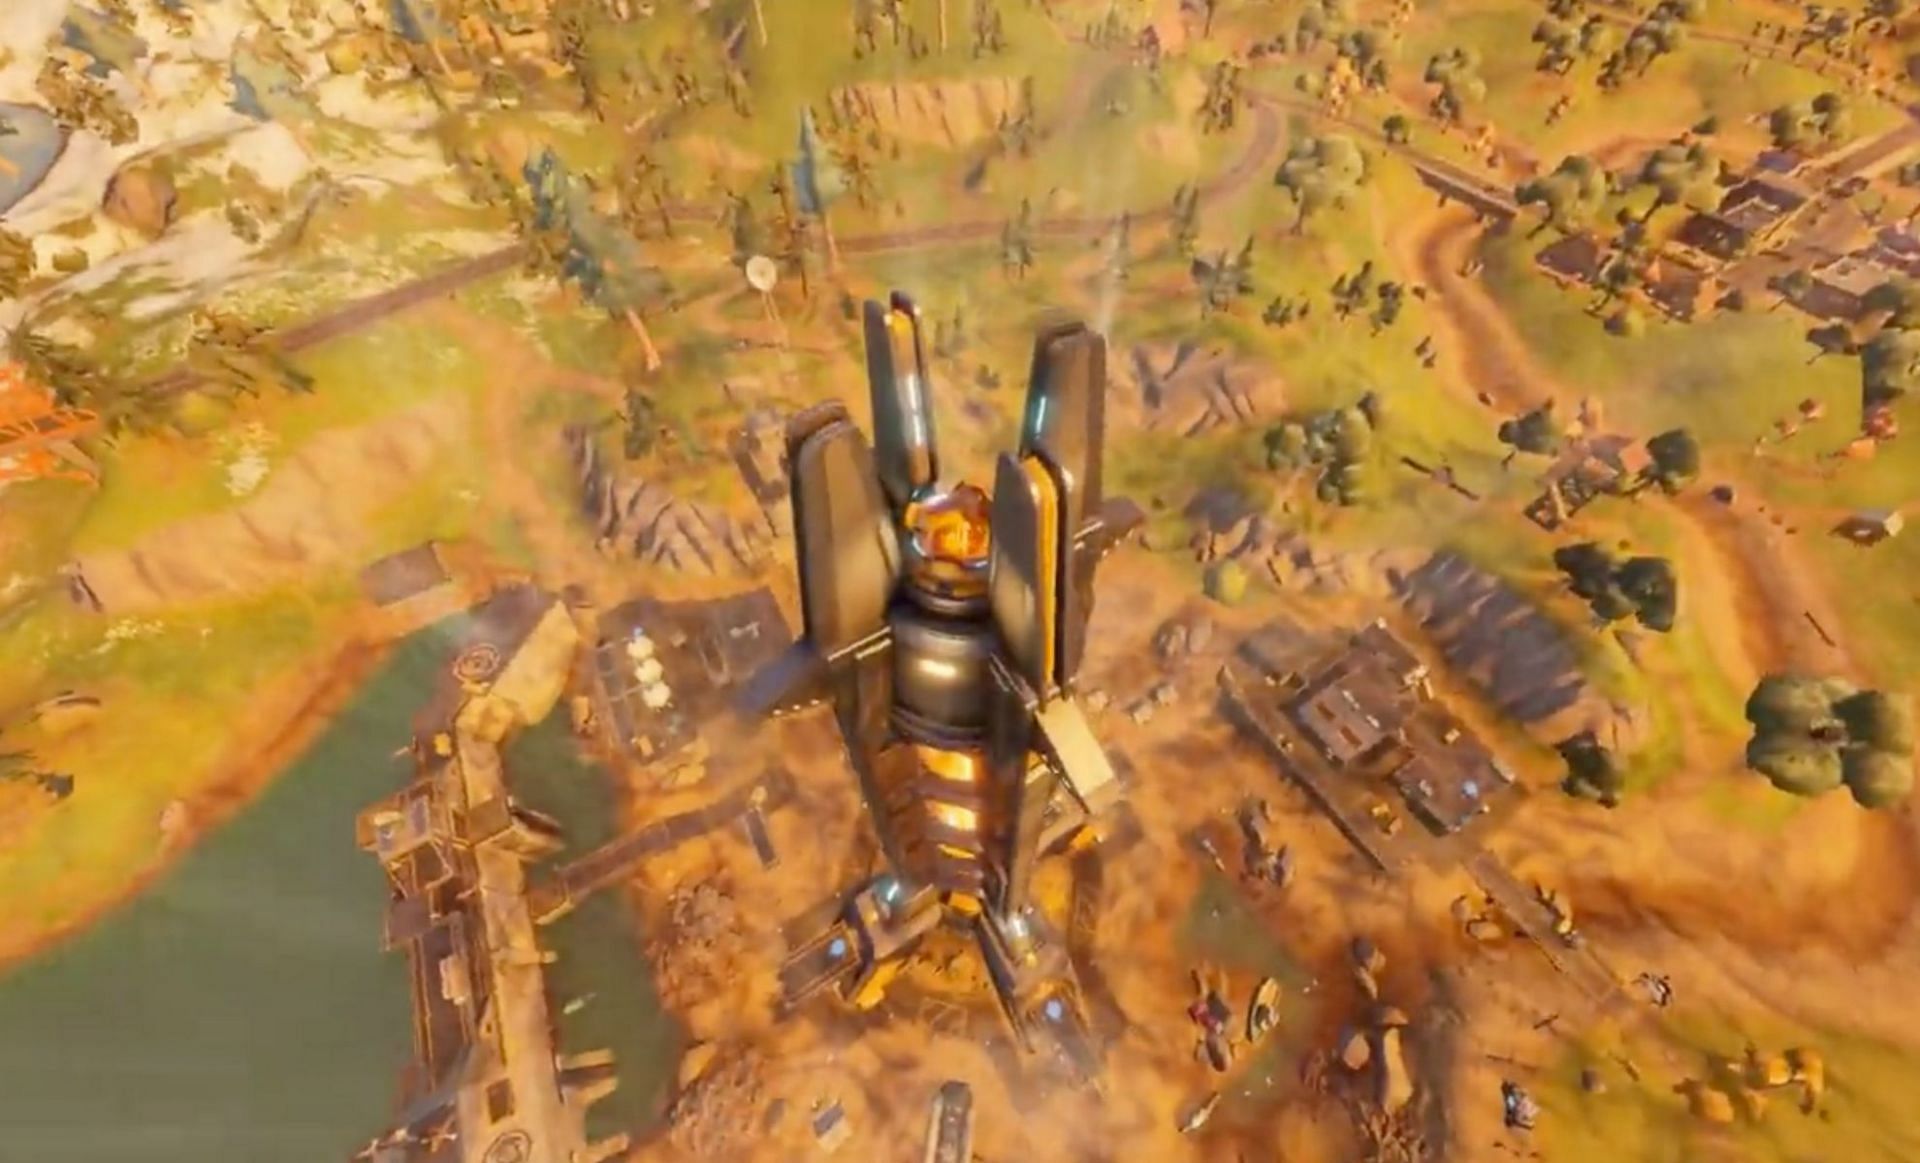 New Doomsday device (Image via FortTory on Twitter)